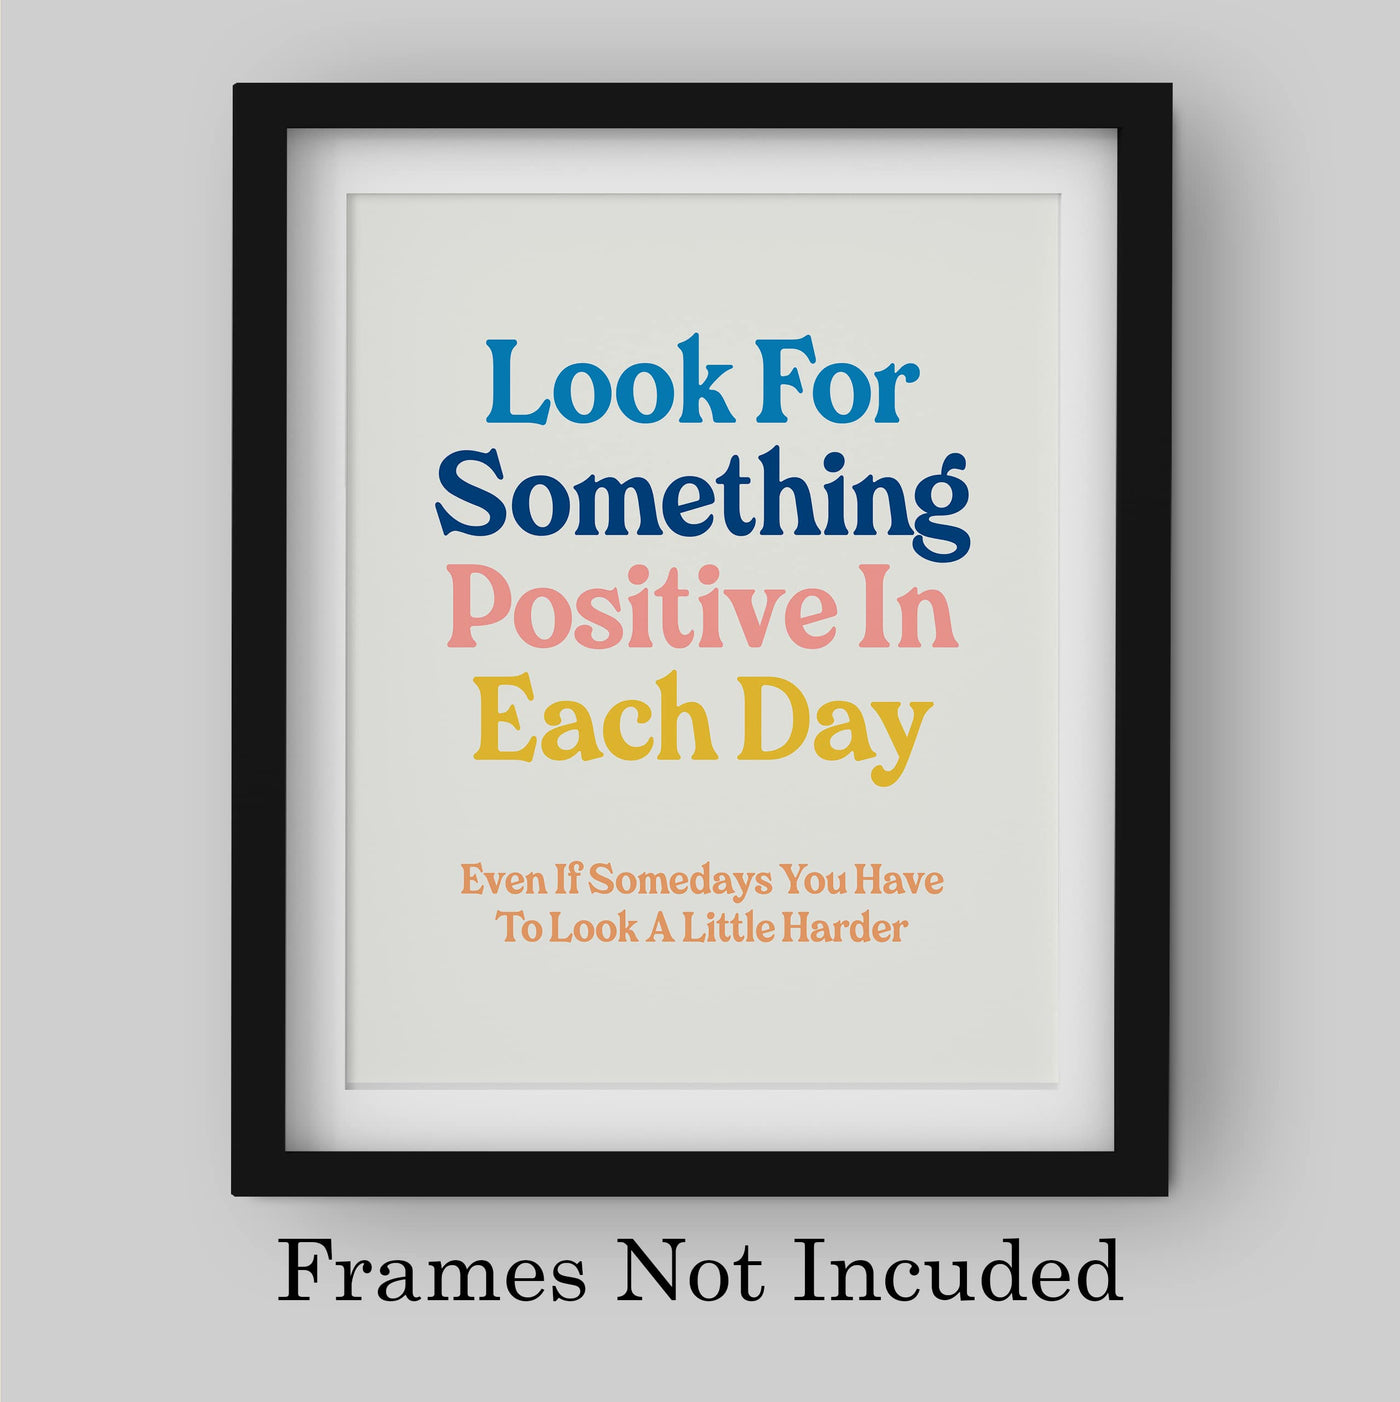 "Look For Something Positive Each Day" Inspirational Quotes Wall Sign -8 x 10" Motivational Poster Print -Ready to Frame. Retro Typographic Design. Home-Office-Classroom-Counseling Decor!